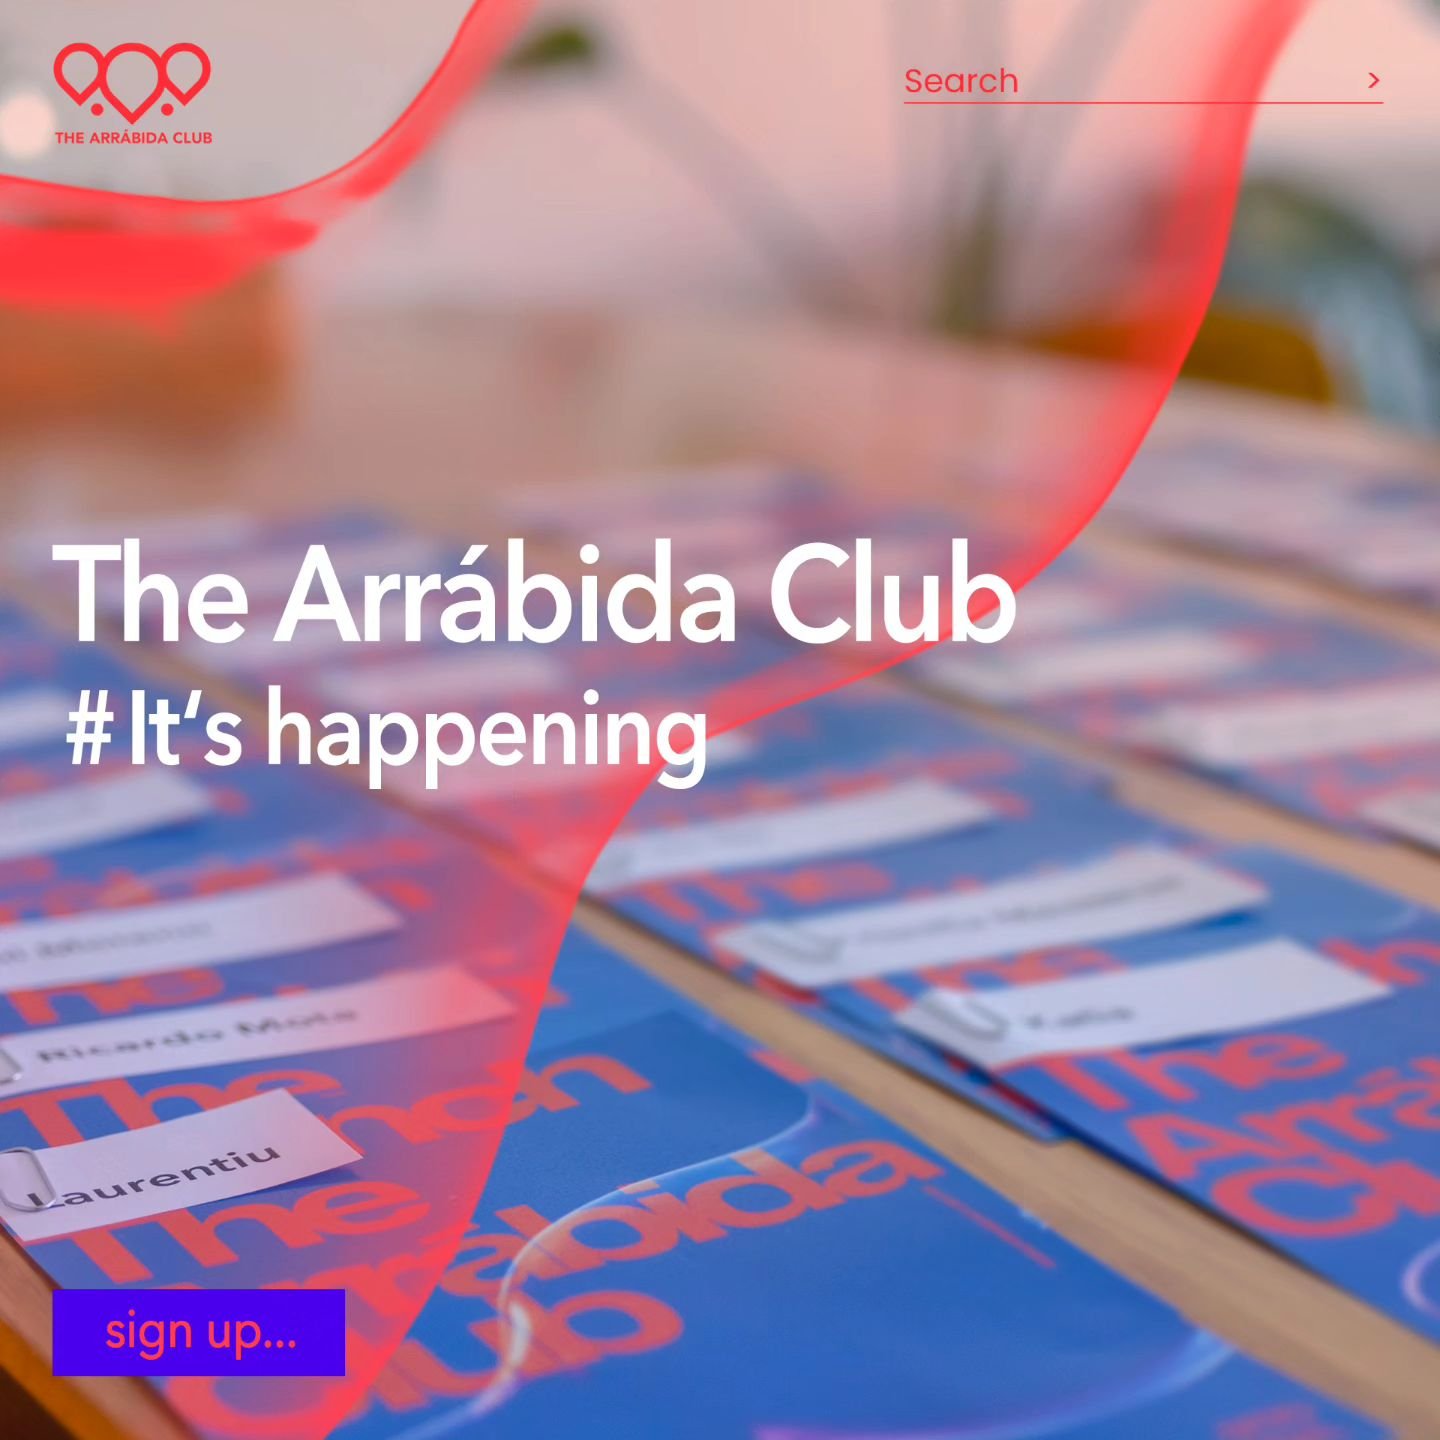 Friendly Reminder: Tomorrow is the big day for the launch of The Arr&aacute;bida Club!

Date: Tomorrow

Time: 4:00 PM

Location: Sitio Set&uacute;bal

Haven't secured your spot yet? Don't worry! Sign up now through the link in our bio. Let's make thi